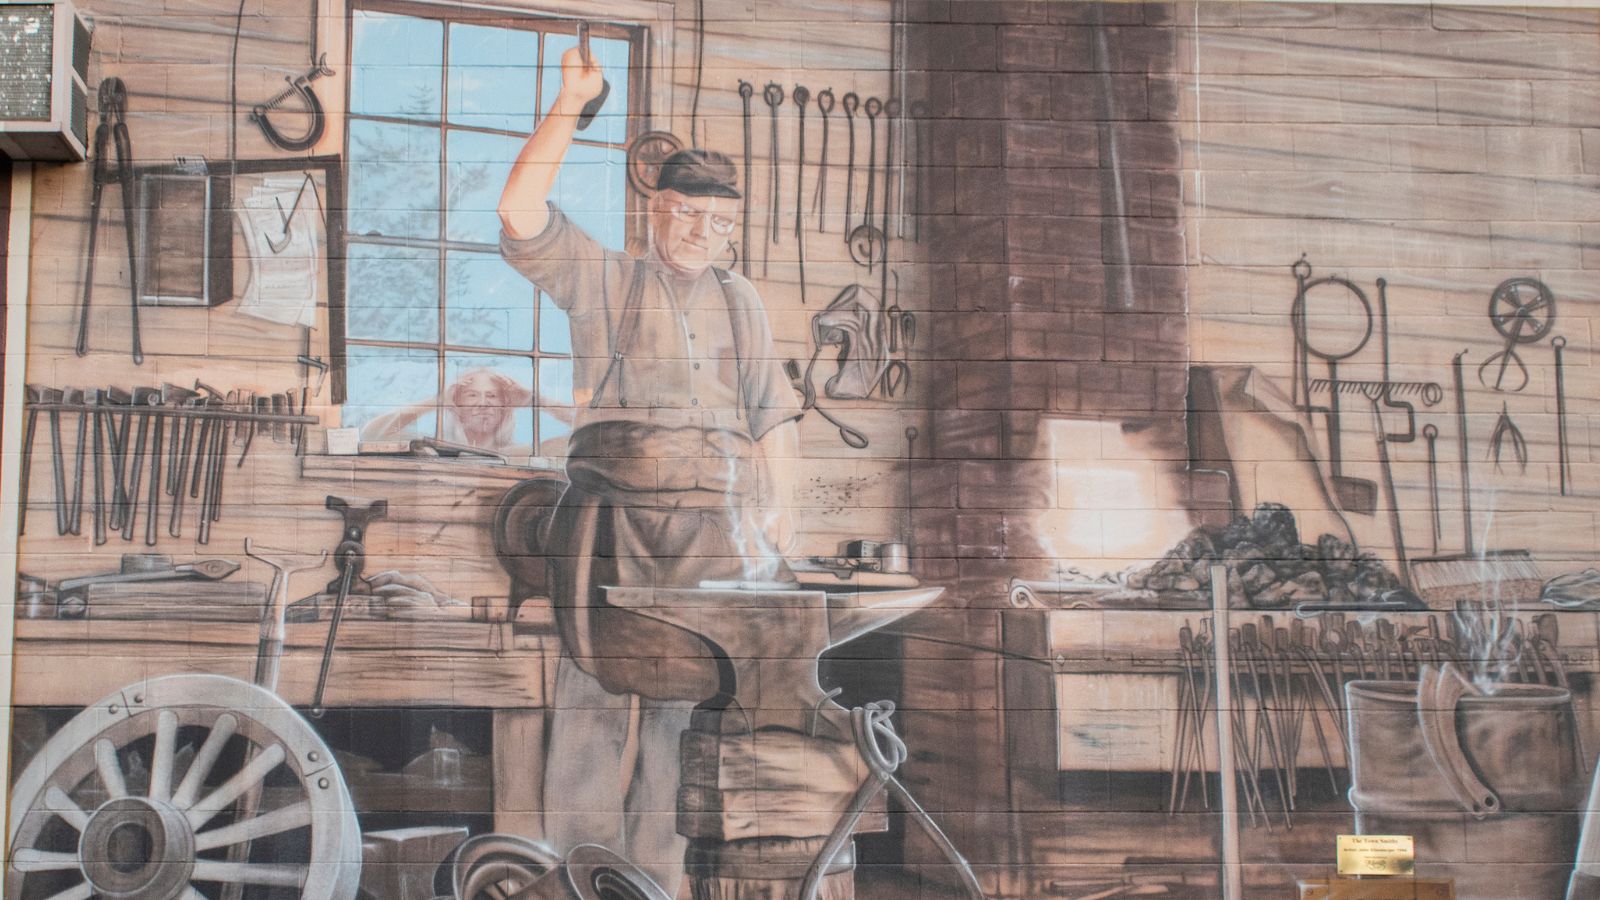 Photo of the Town Smithy mural.